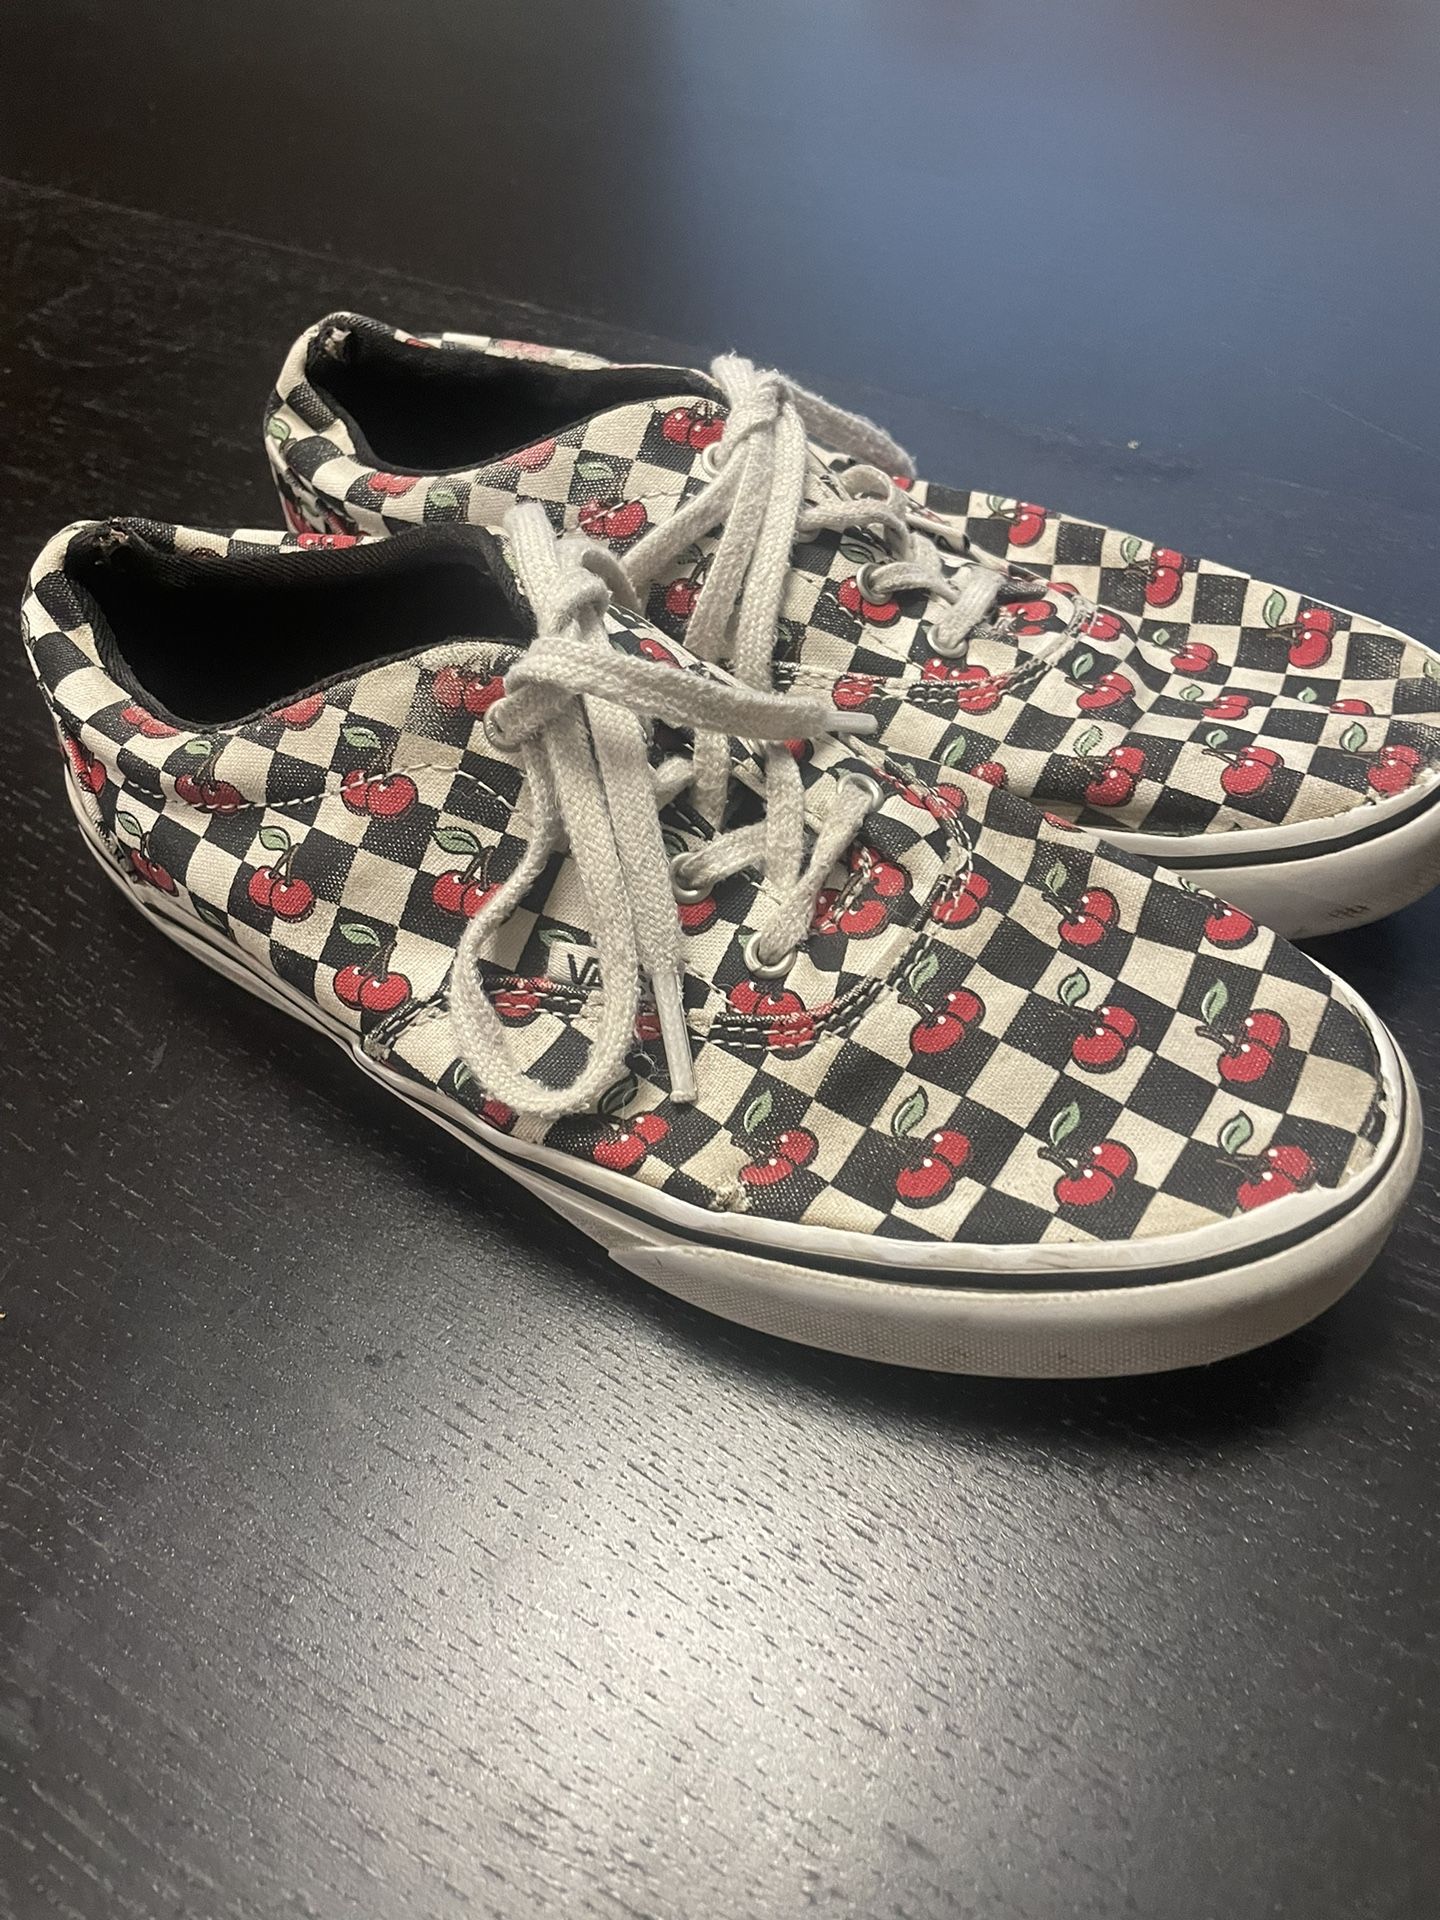 Vans Women's Classic Checkerboard Cherries, Size 5 for Sale in Fort Worth, TX - OfferUp